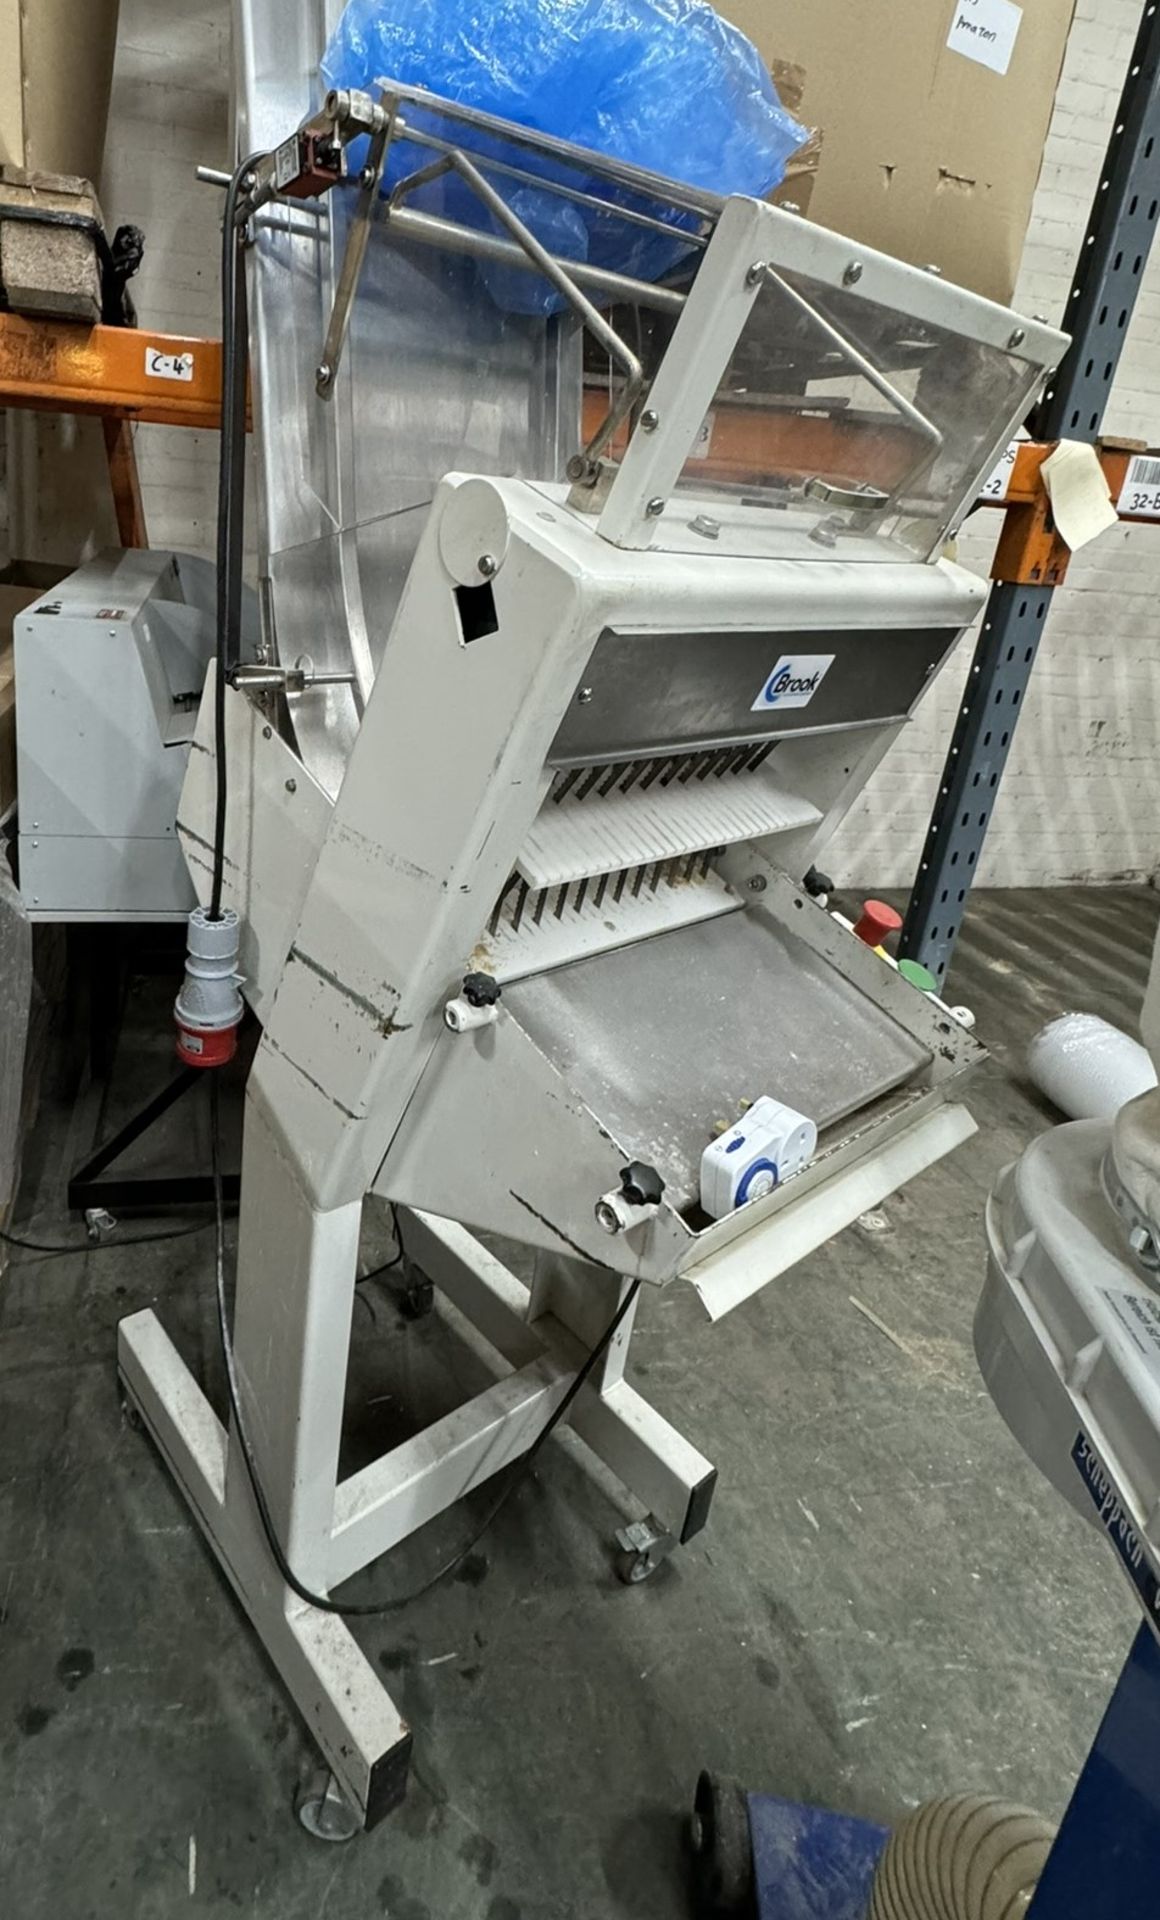 Brook 11188 Professional Automatic Bread slicer - Image 2 of 5